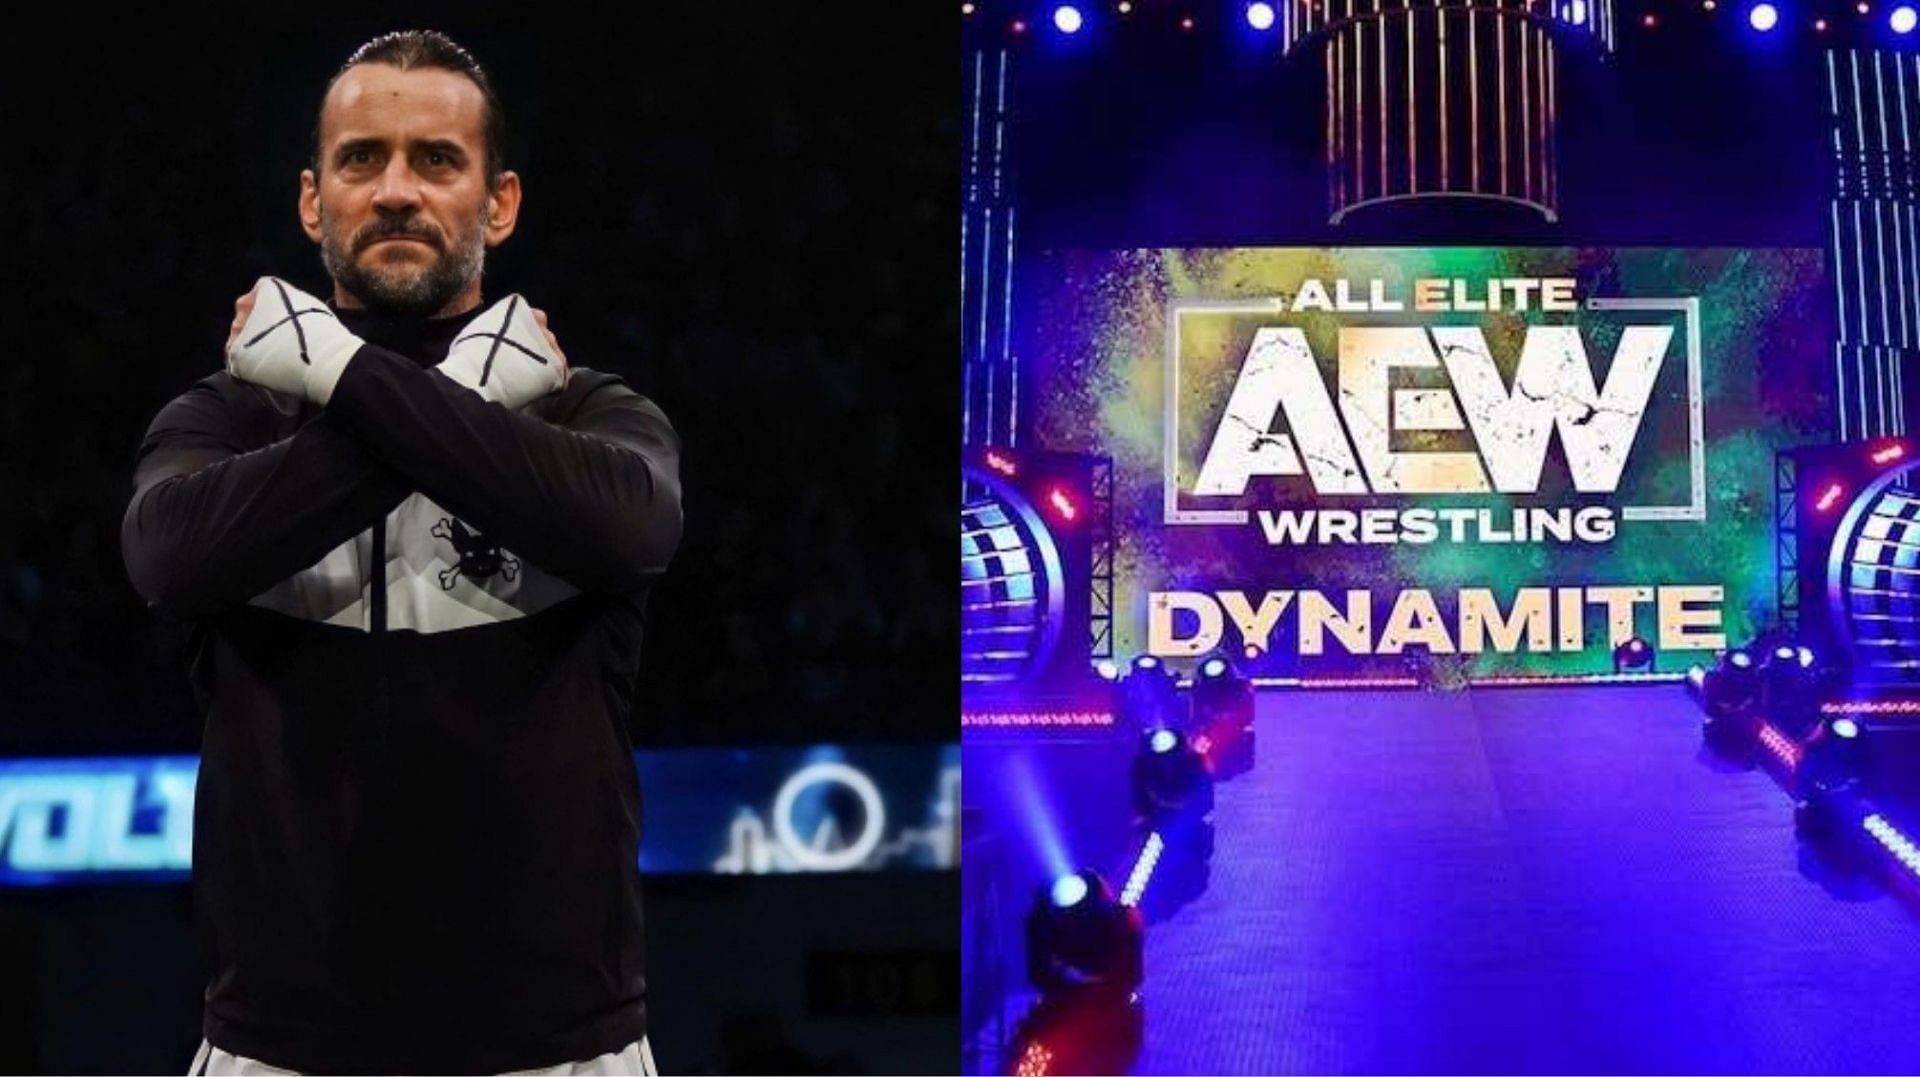 When will The Second City Saint return on AEW Dynamite?